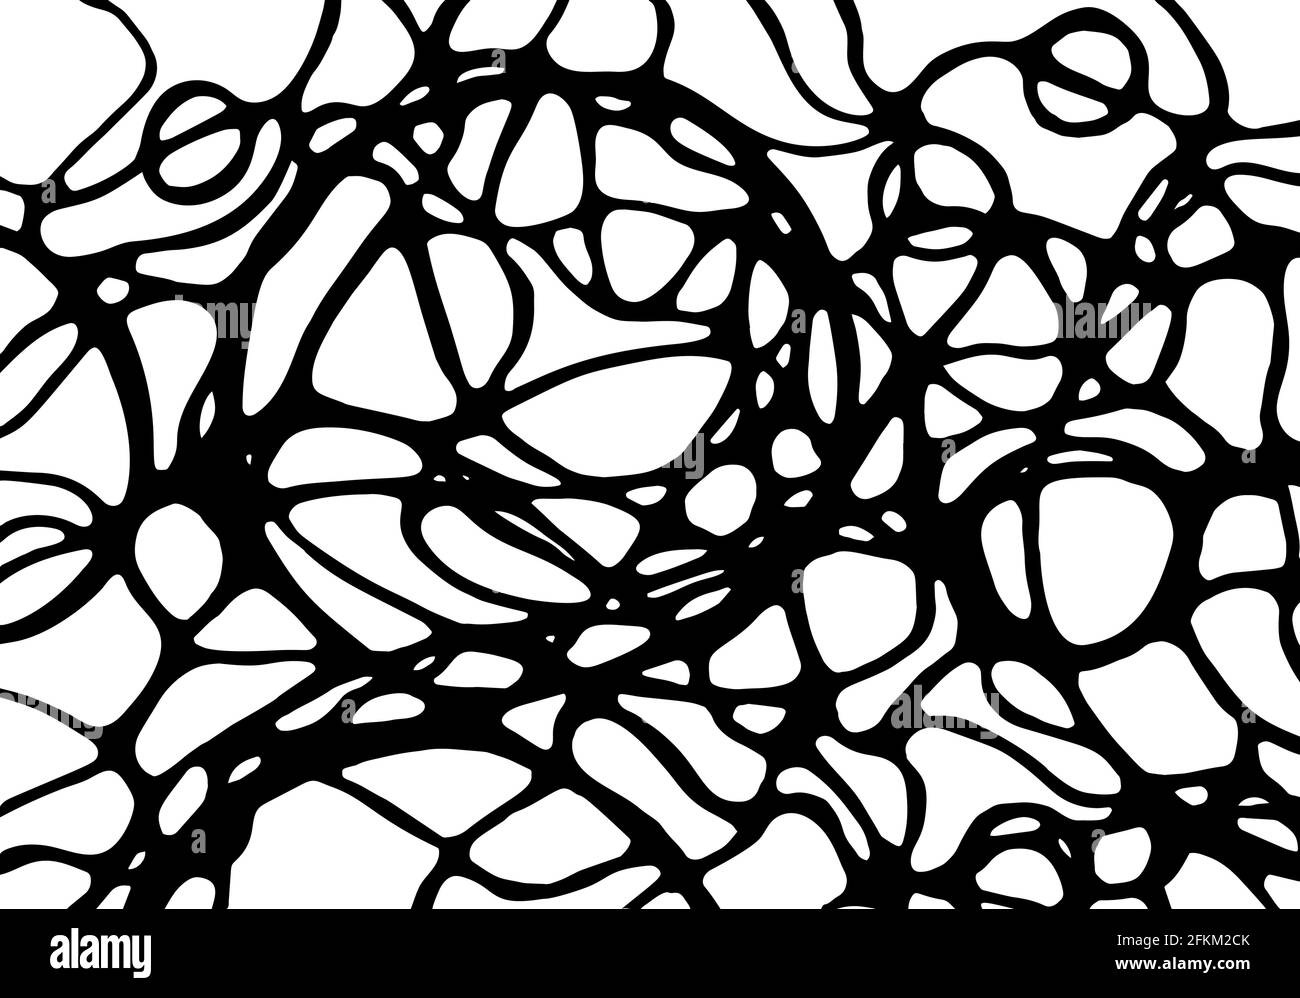 Neurographic lines sketch vector illustration. Abstract chaotic wavy curves pattern background. Hand drawn monochrome neuroart. Right Brain Drawing. C Stock Vector